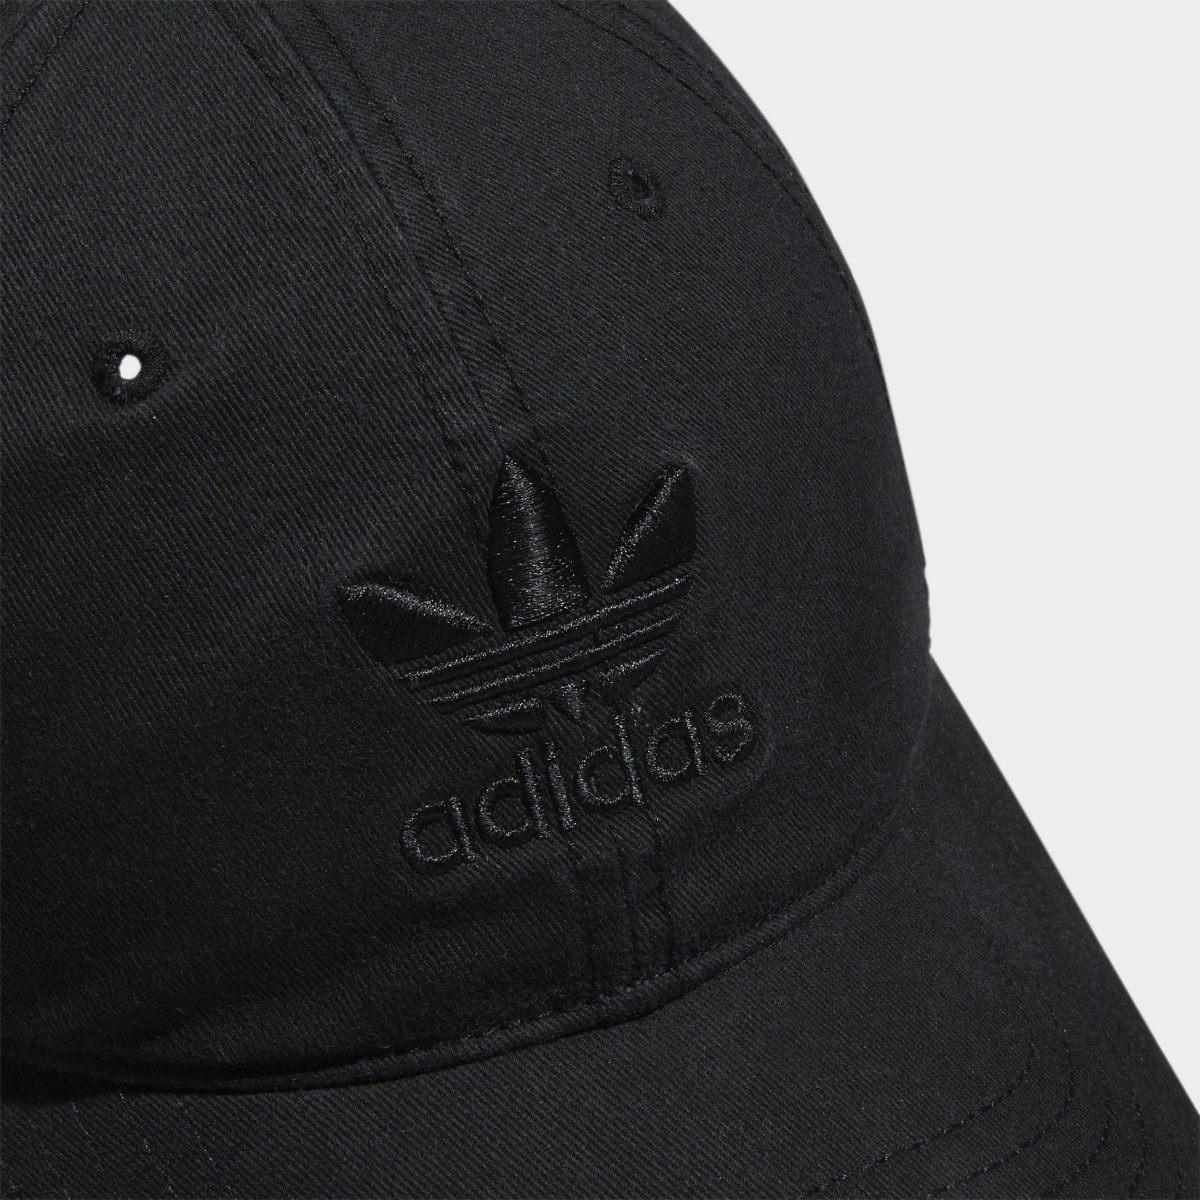 Adidas Relaxed Strap-Back Hat. 4